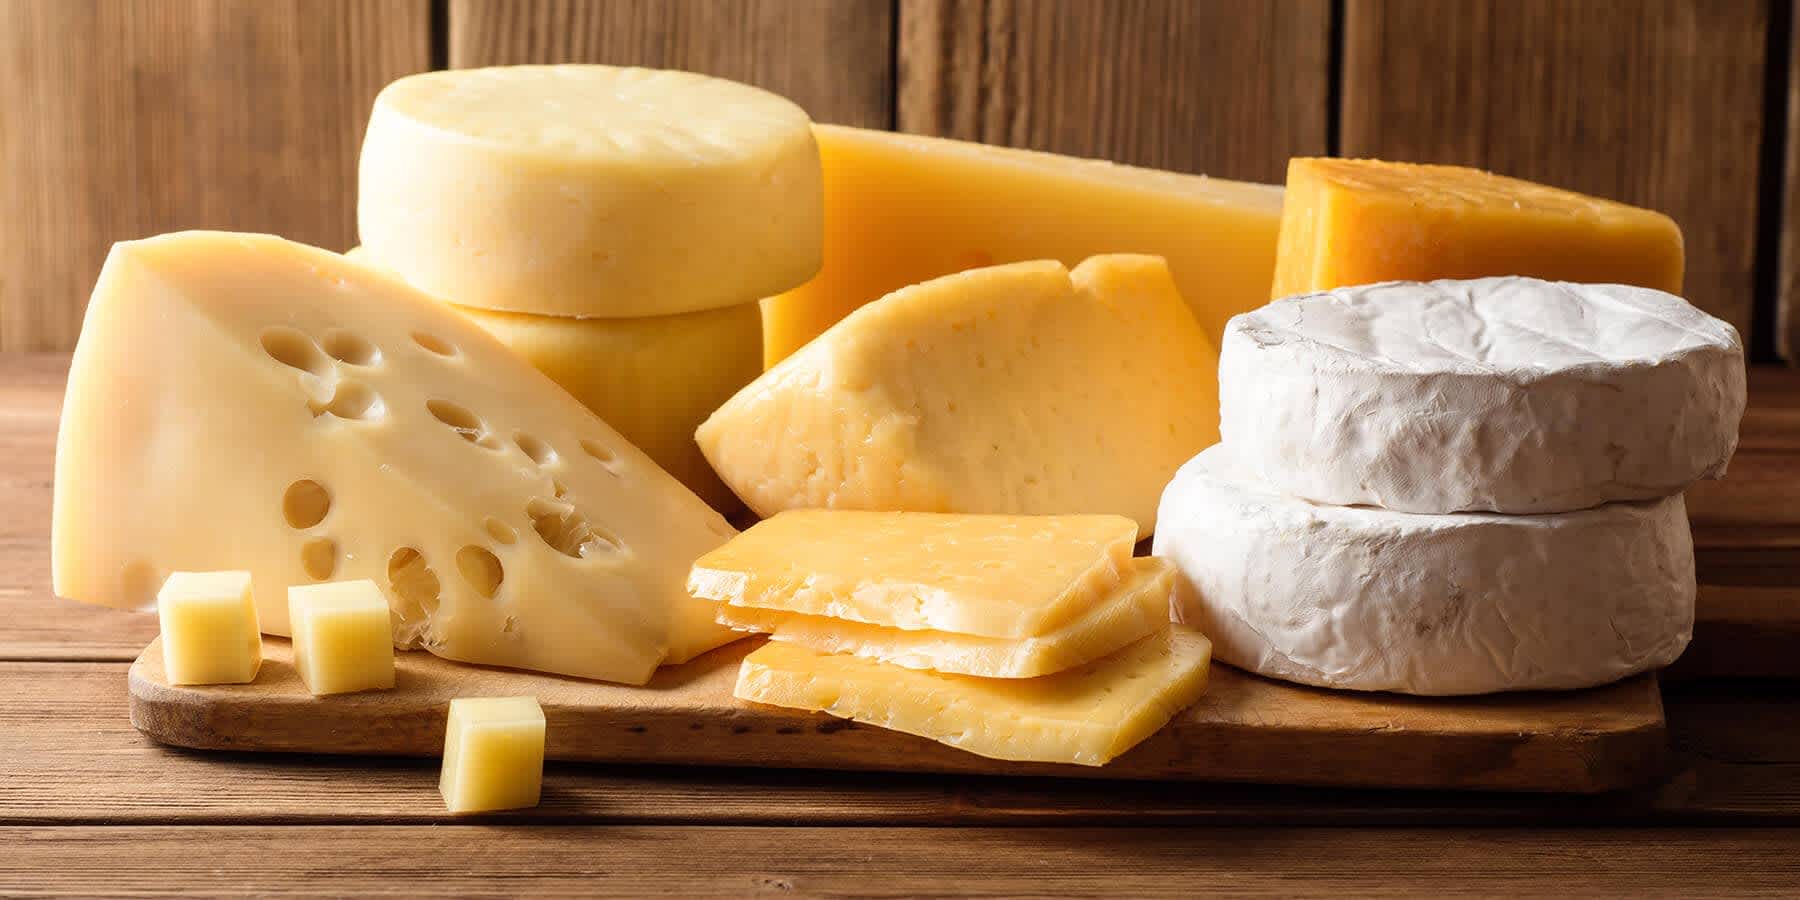 Variety of cheeses on wooden table to represent worst foods for high cholesterol